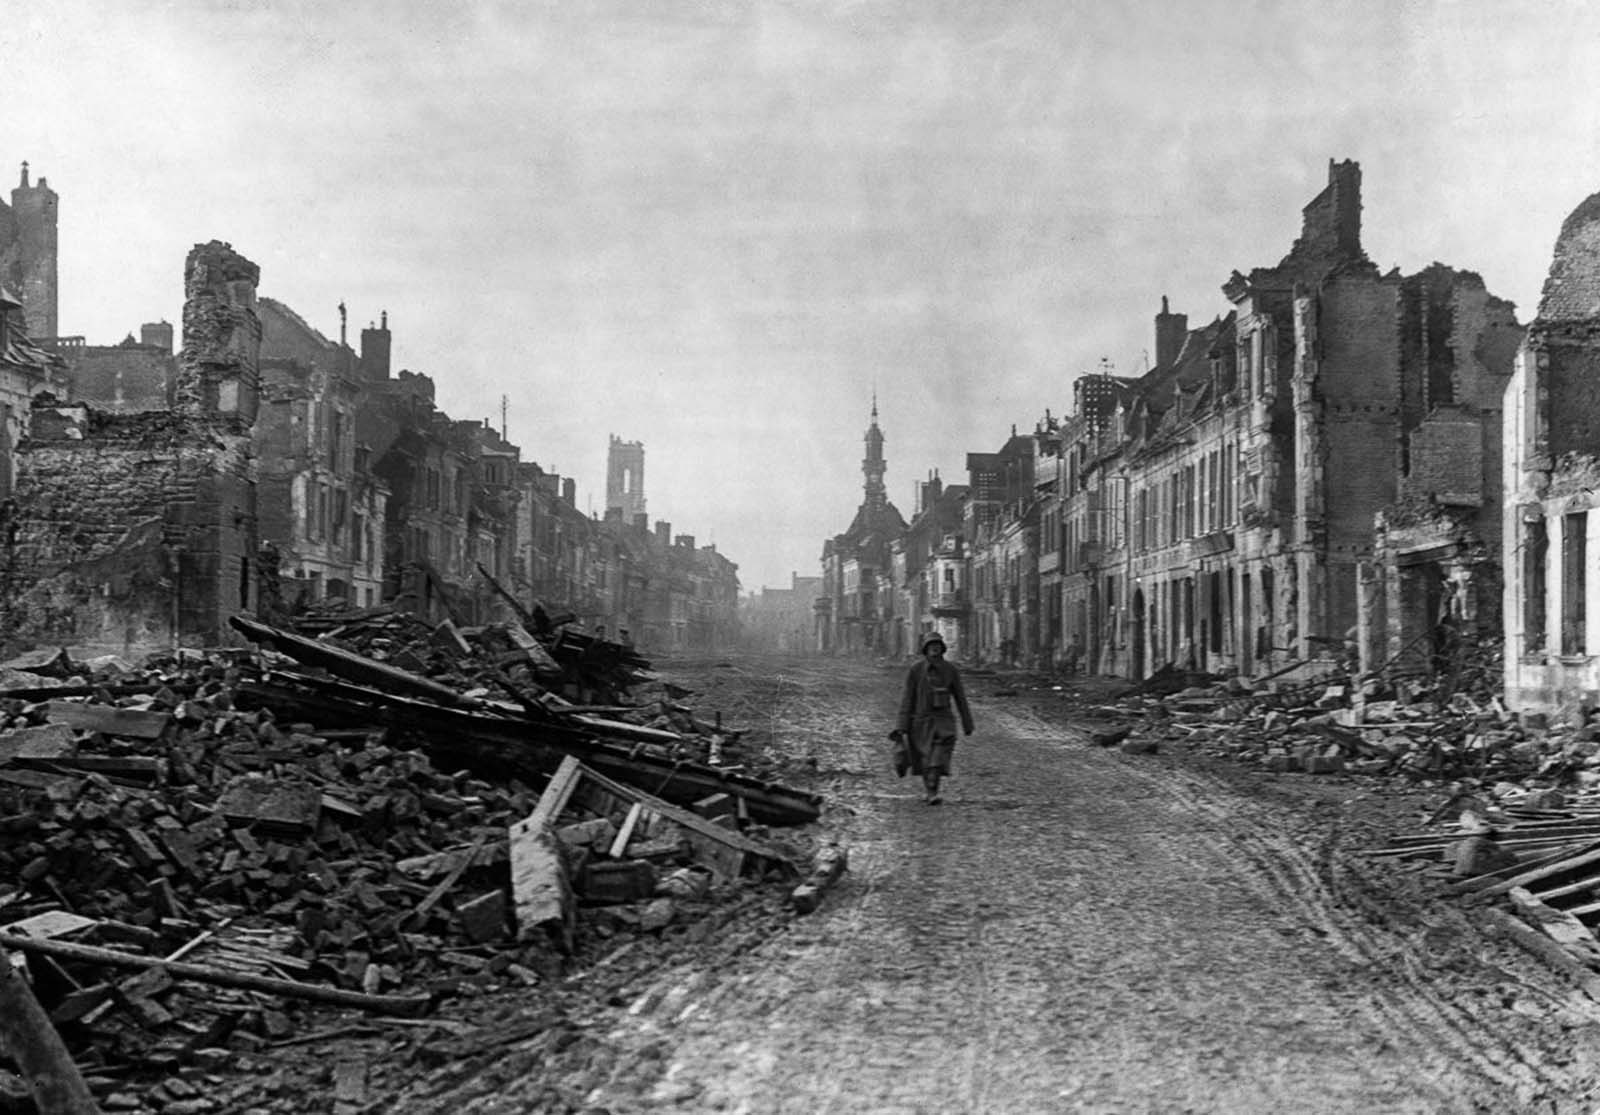 A German soldier walks through the ruined streets of Peronne. November, 1916.